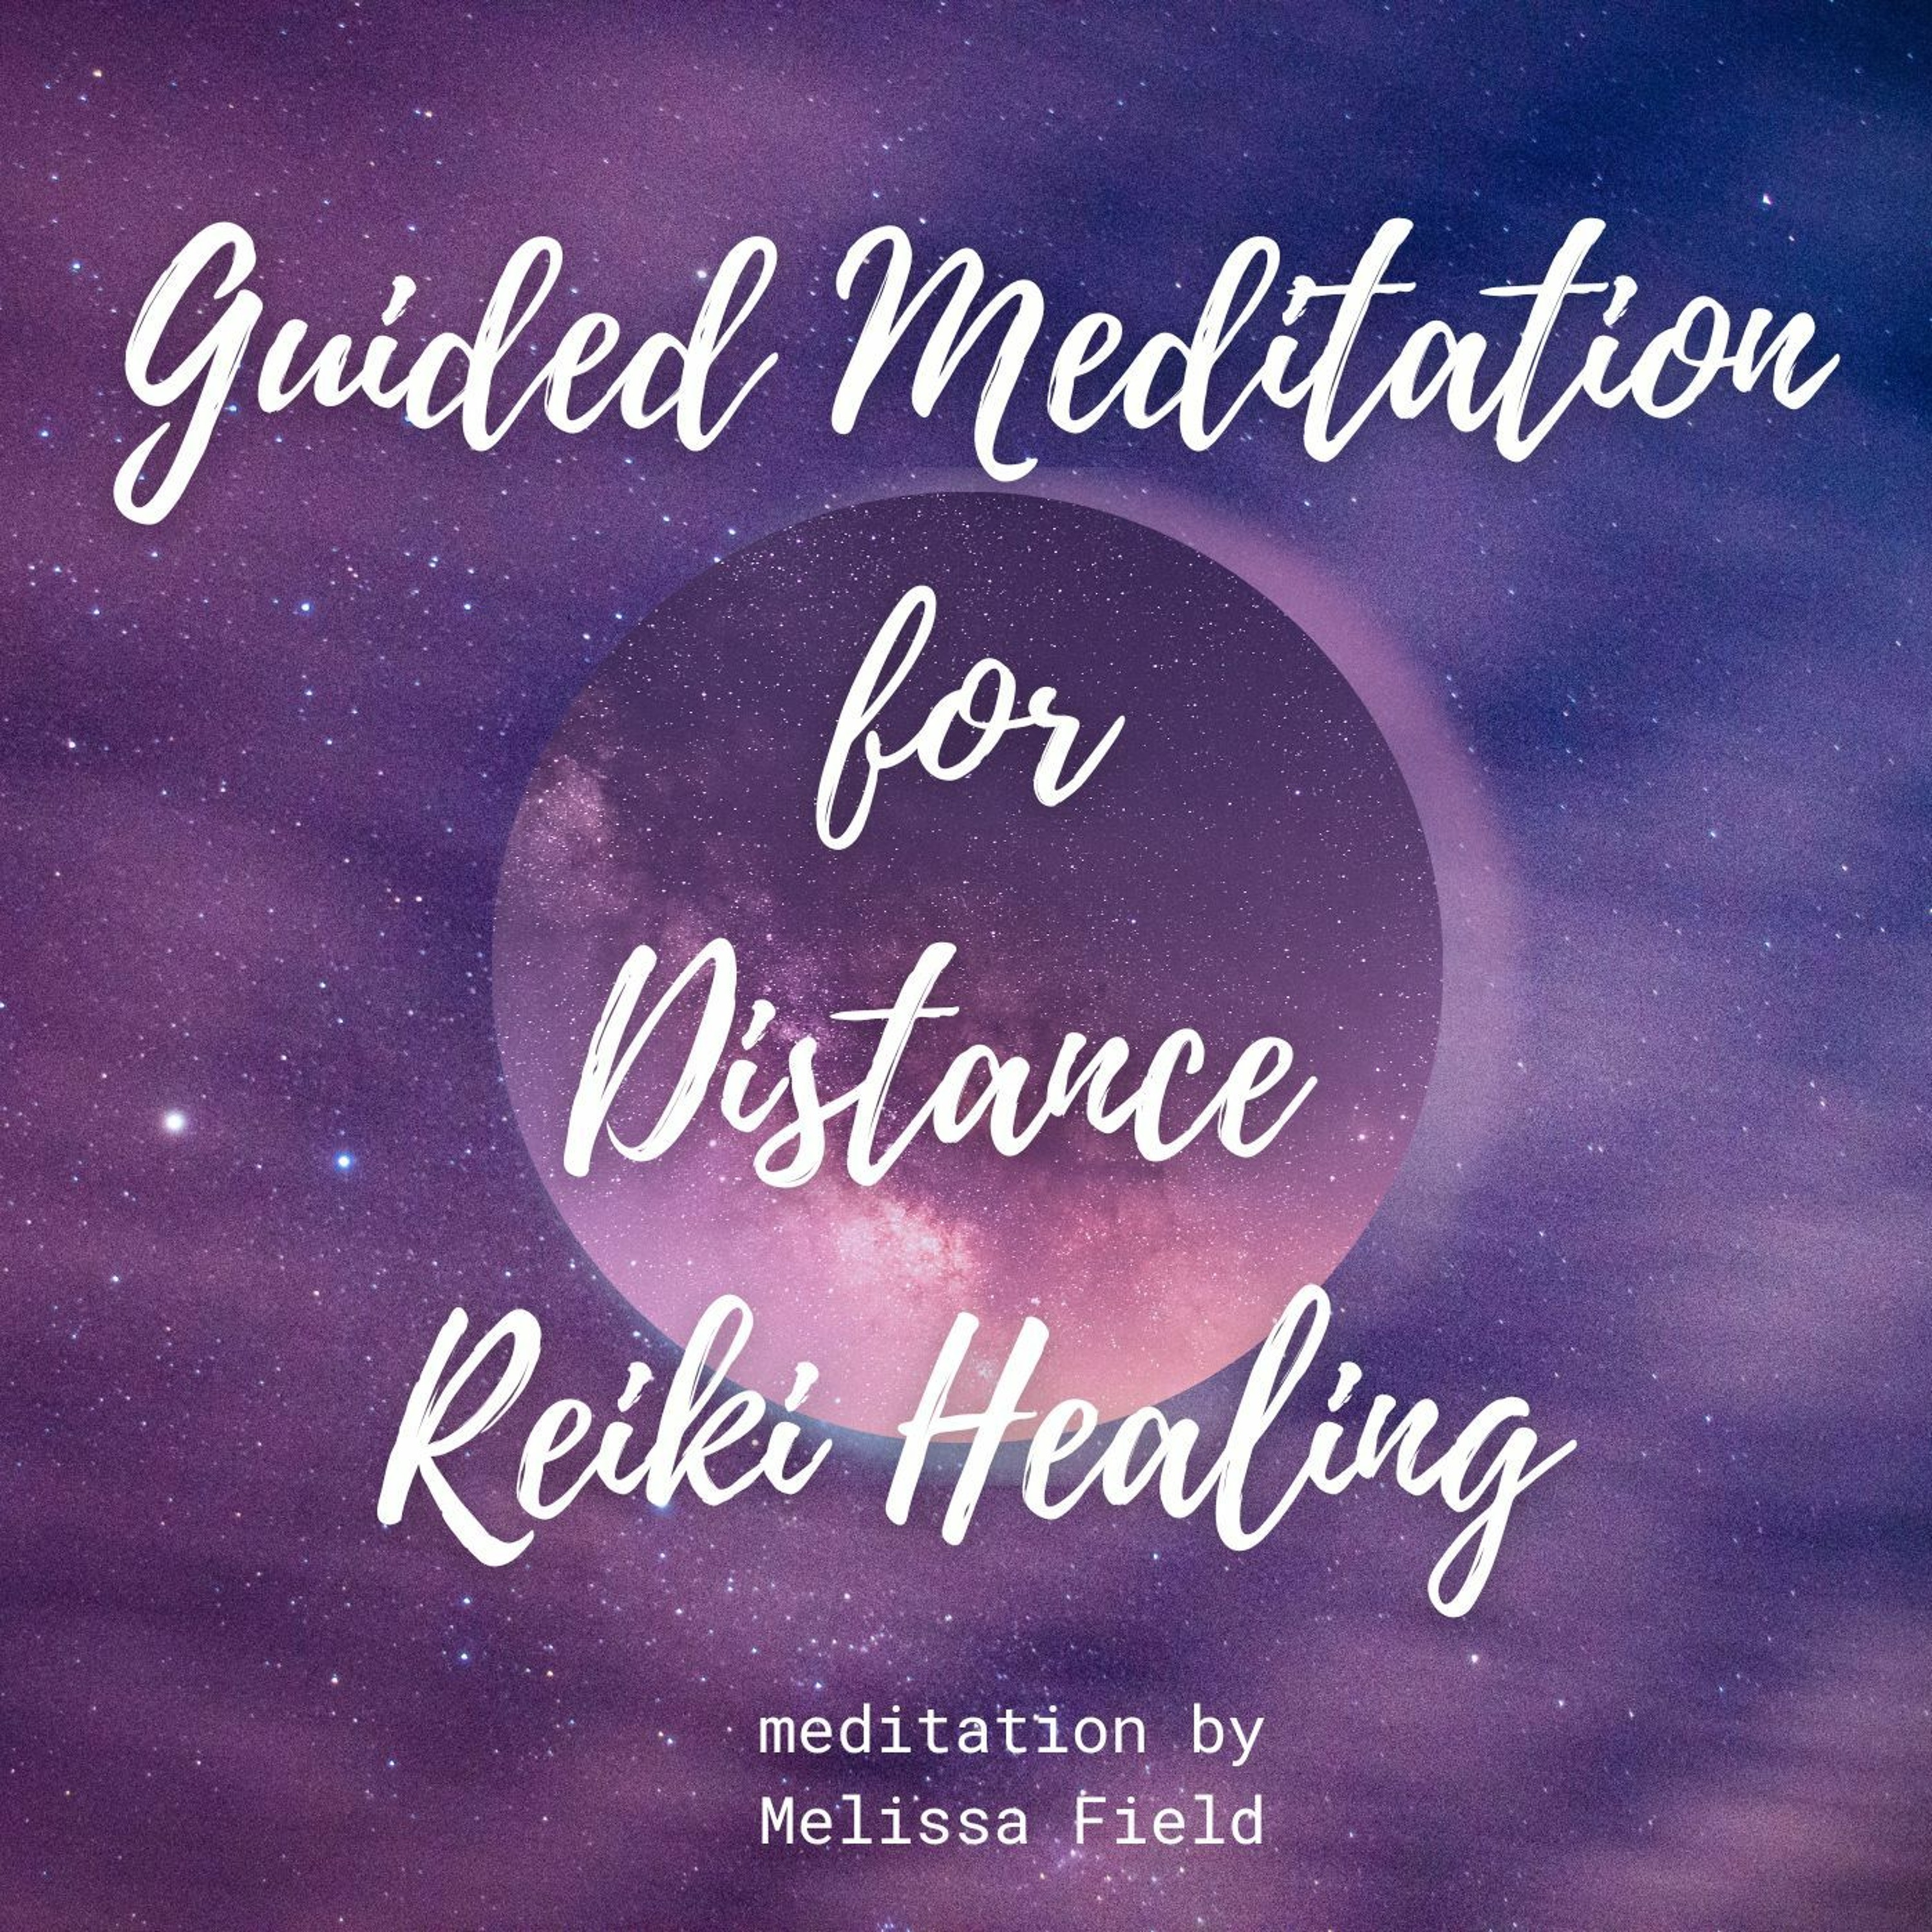 Reiki Healing Share + Preview of Exclusive Meditation